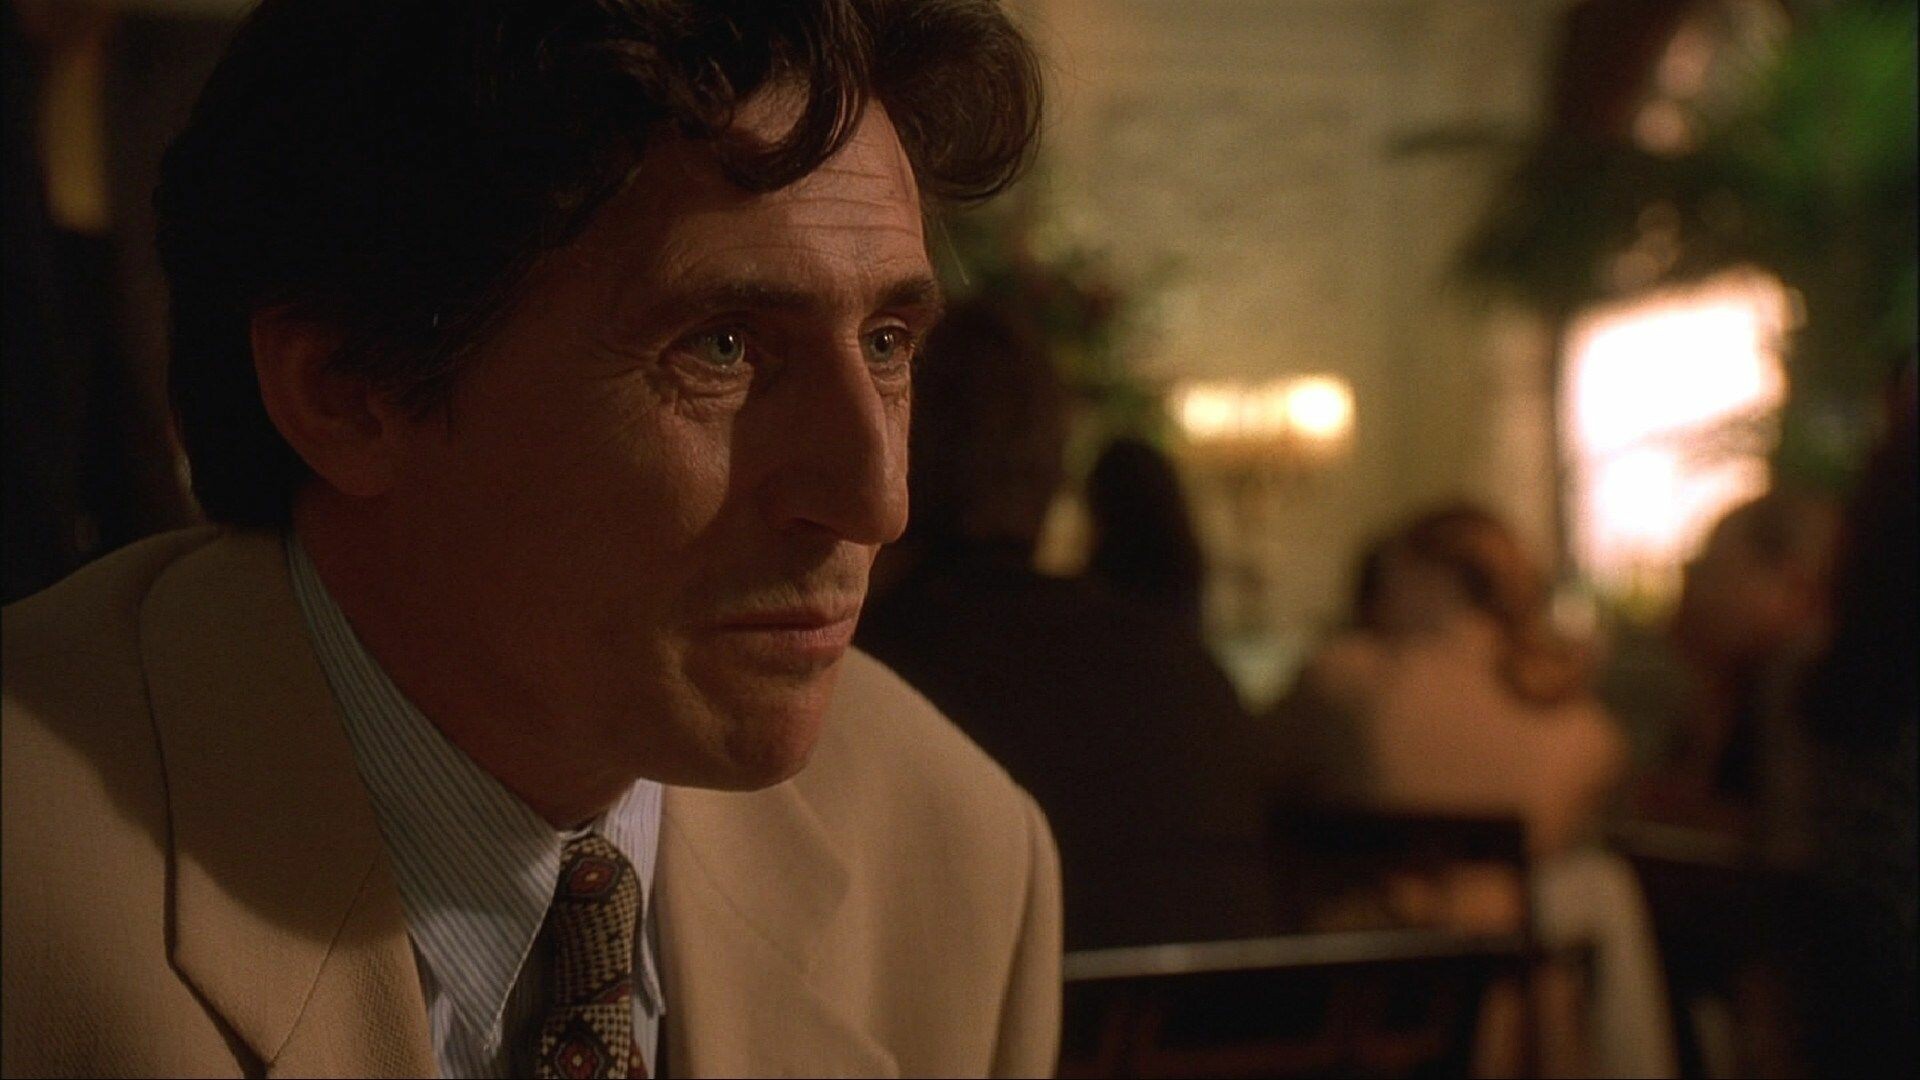 The Usual Suspects: Gabriel Byrne as Dean Keaton, Written by Christopher McQuarrie. 1920x1080 Full HD Background.